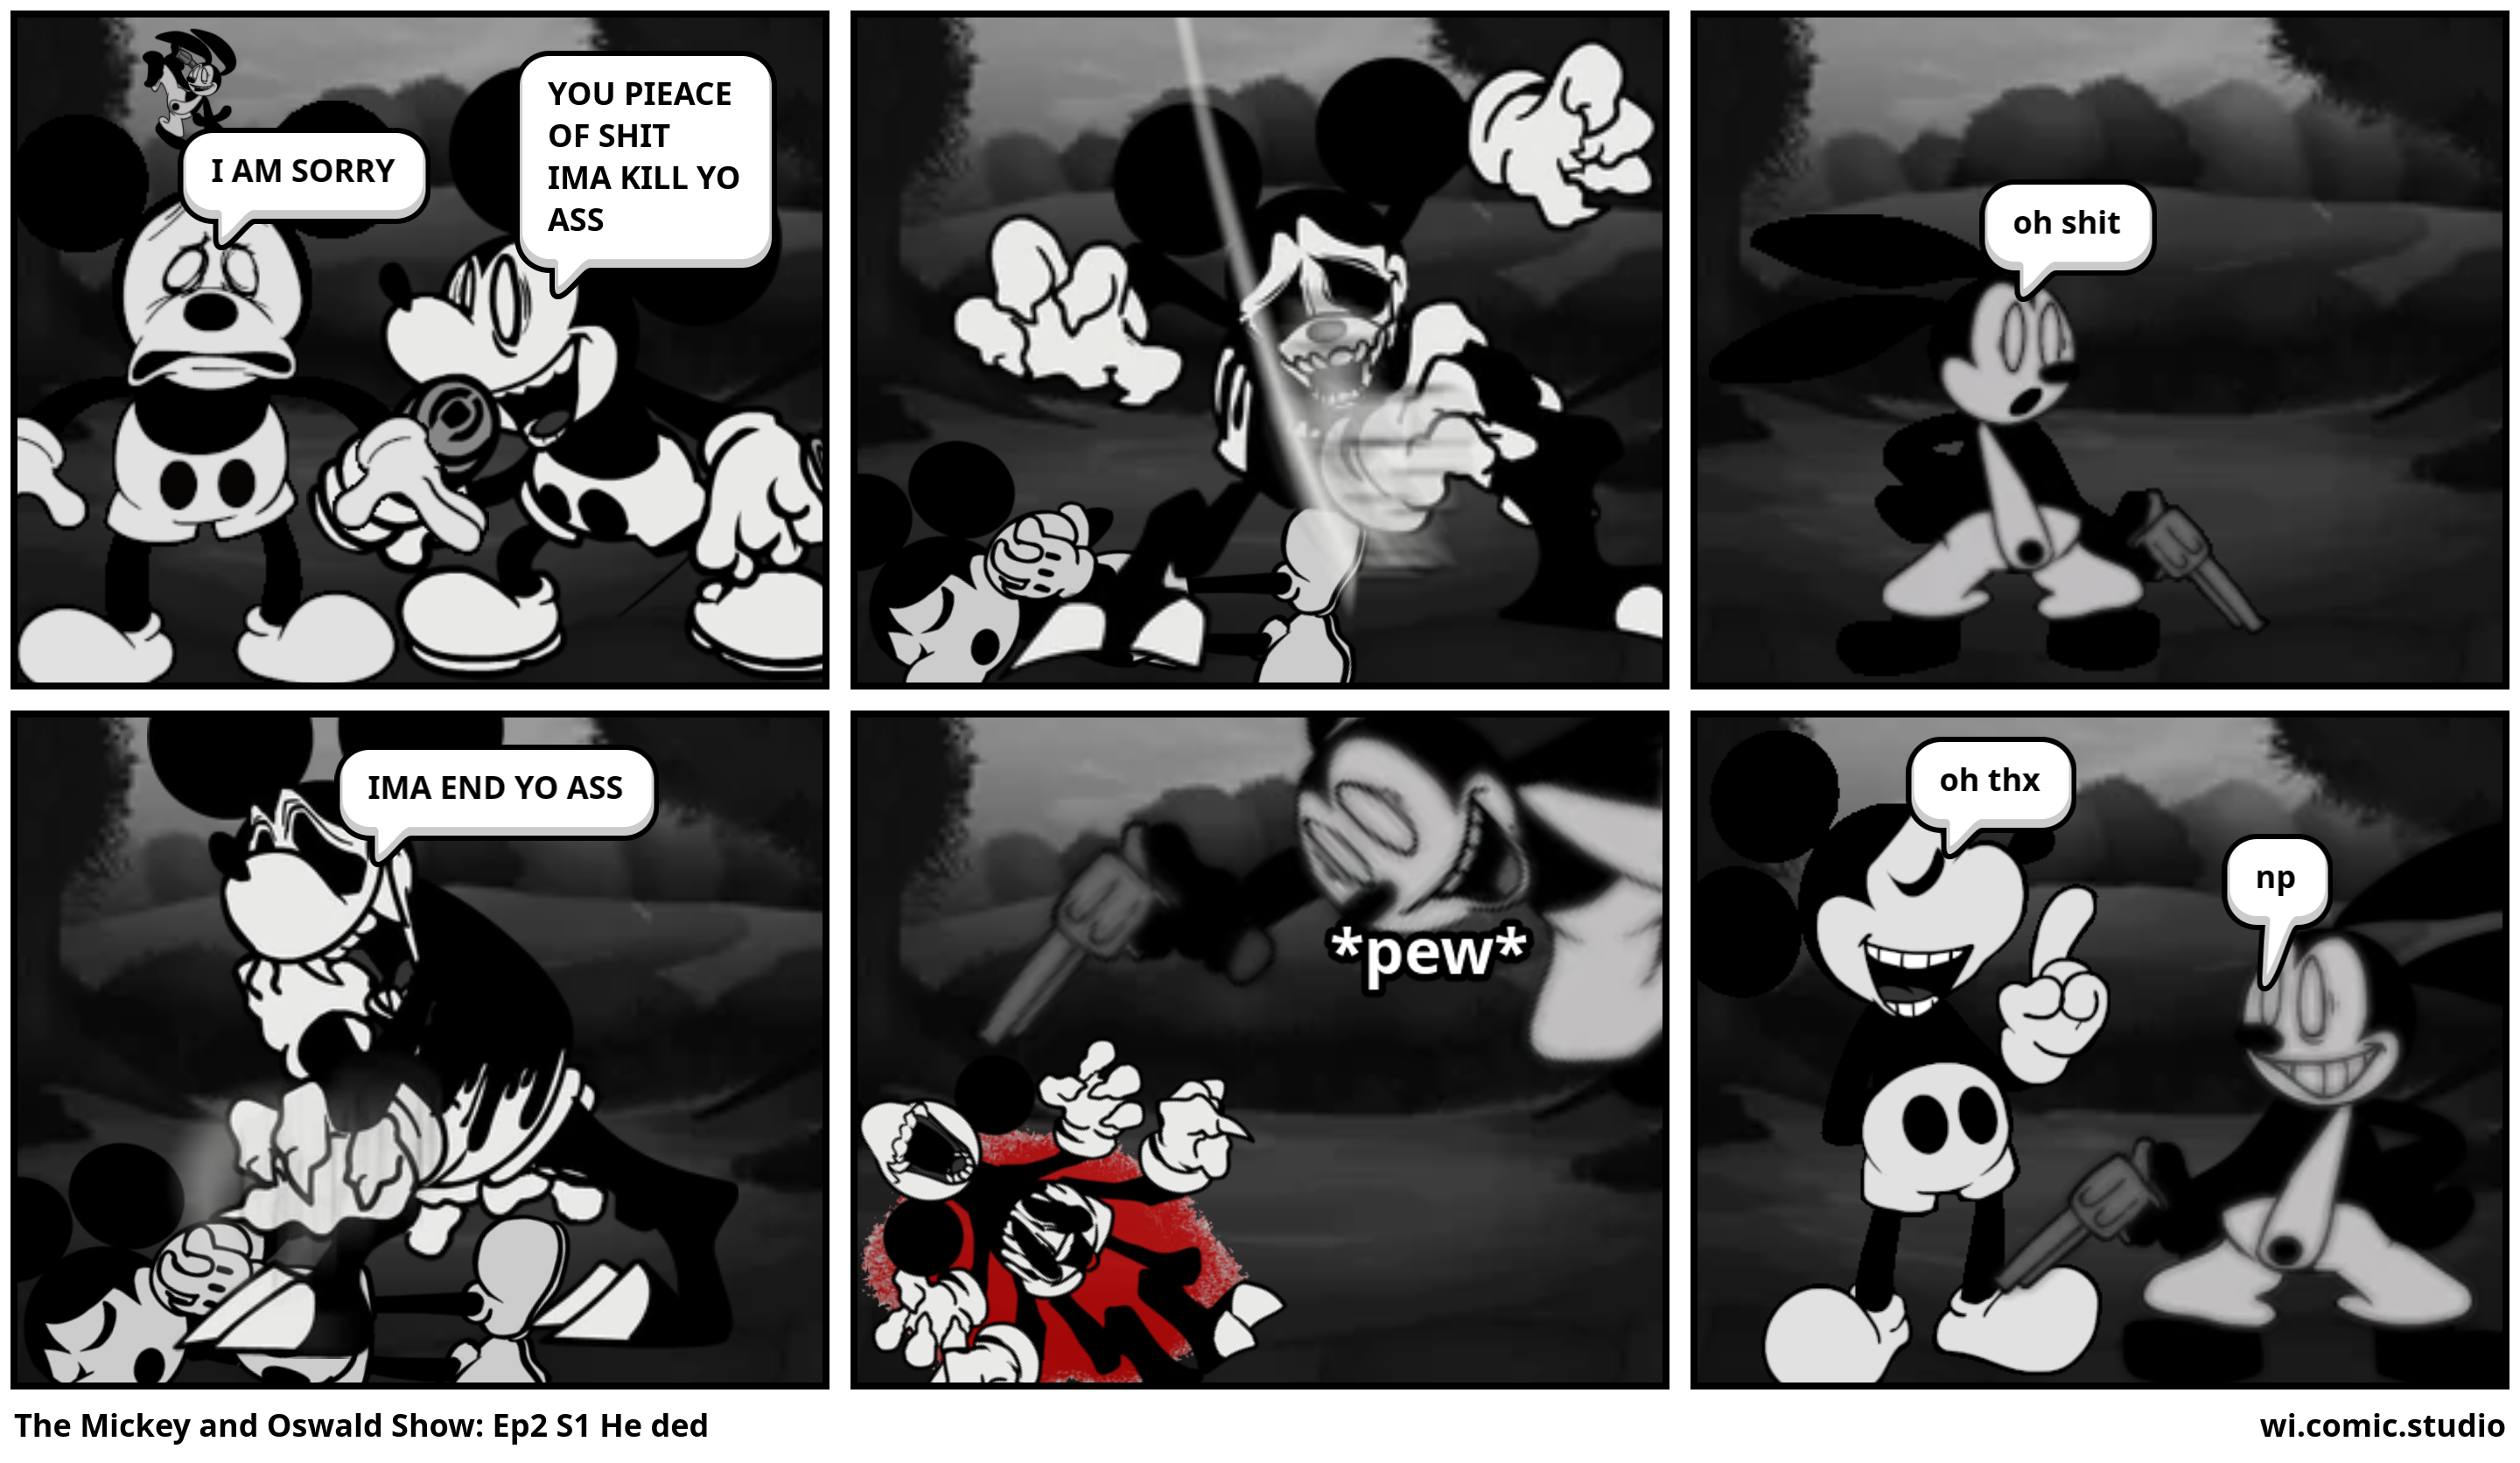 The Mickey and Oswald Show: Ep2 S1 He ded